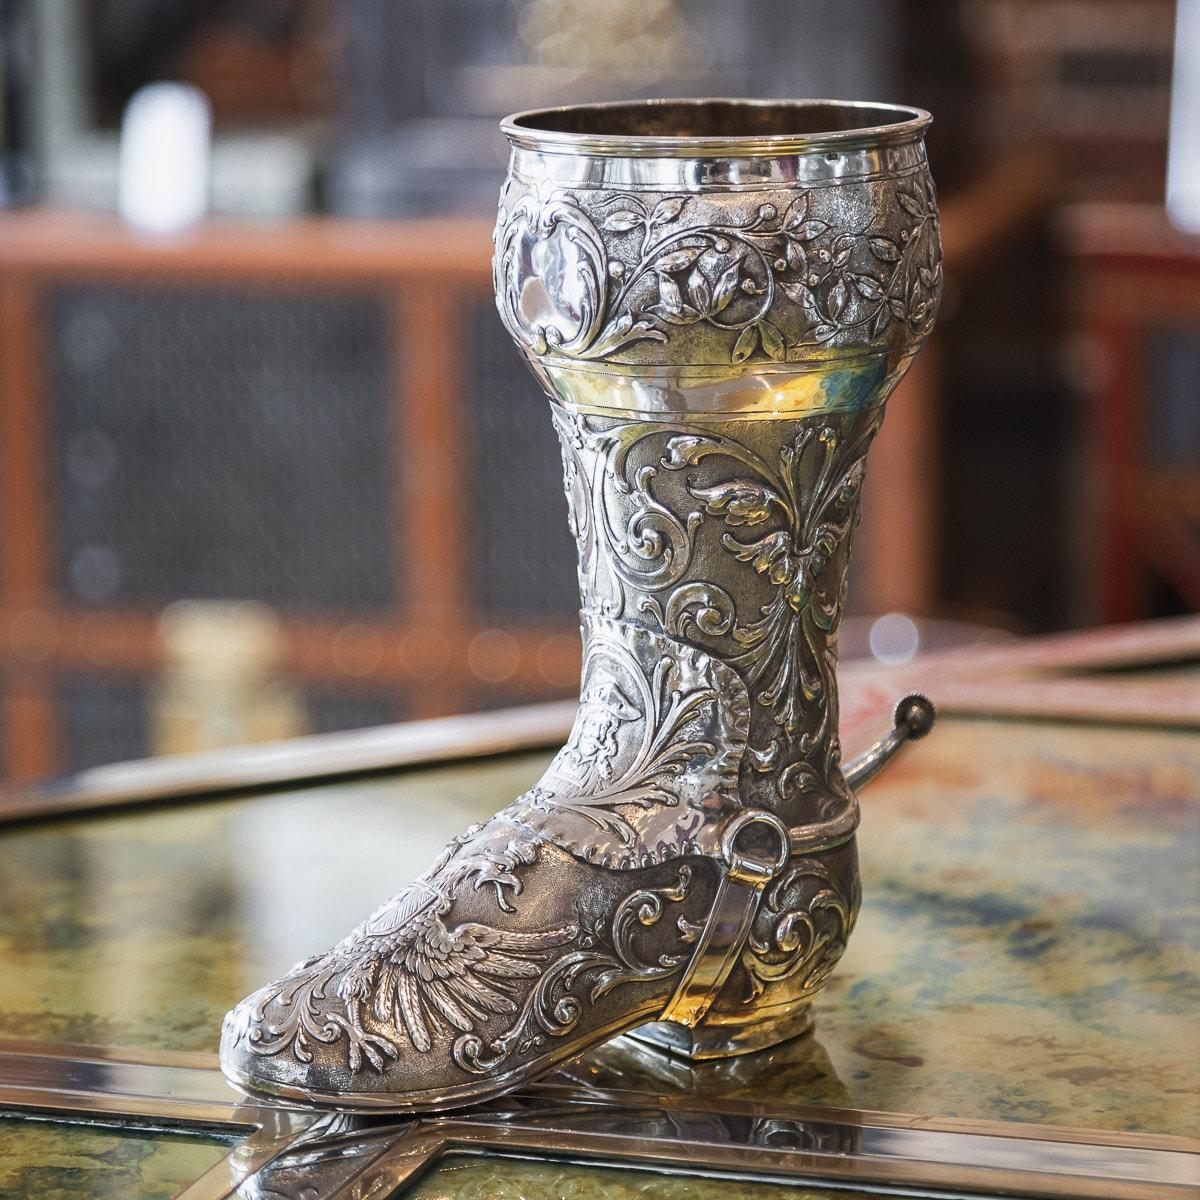 Antique late-19th century German very rare solid silver novelty boot shaped drinking vessel, very decorative and ornate in design, chased with scrolling foliage, a double headed eagle, realistically modelled strap and buckle and the heal applied